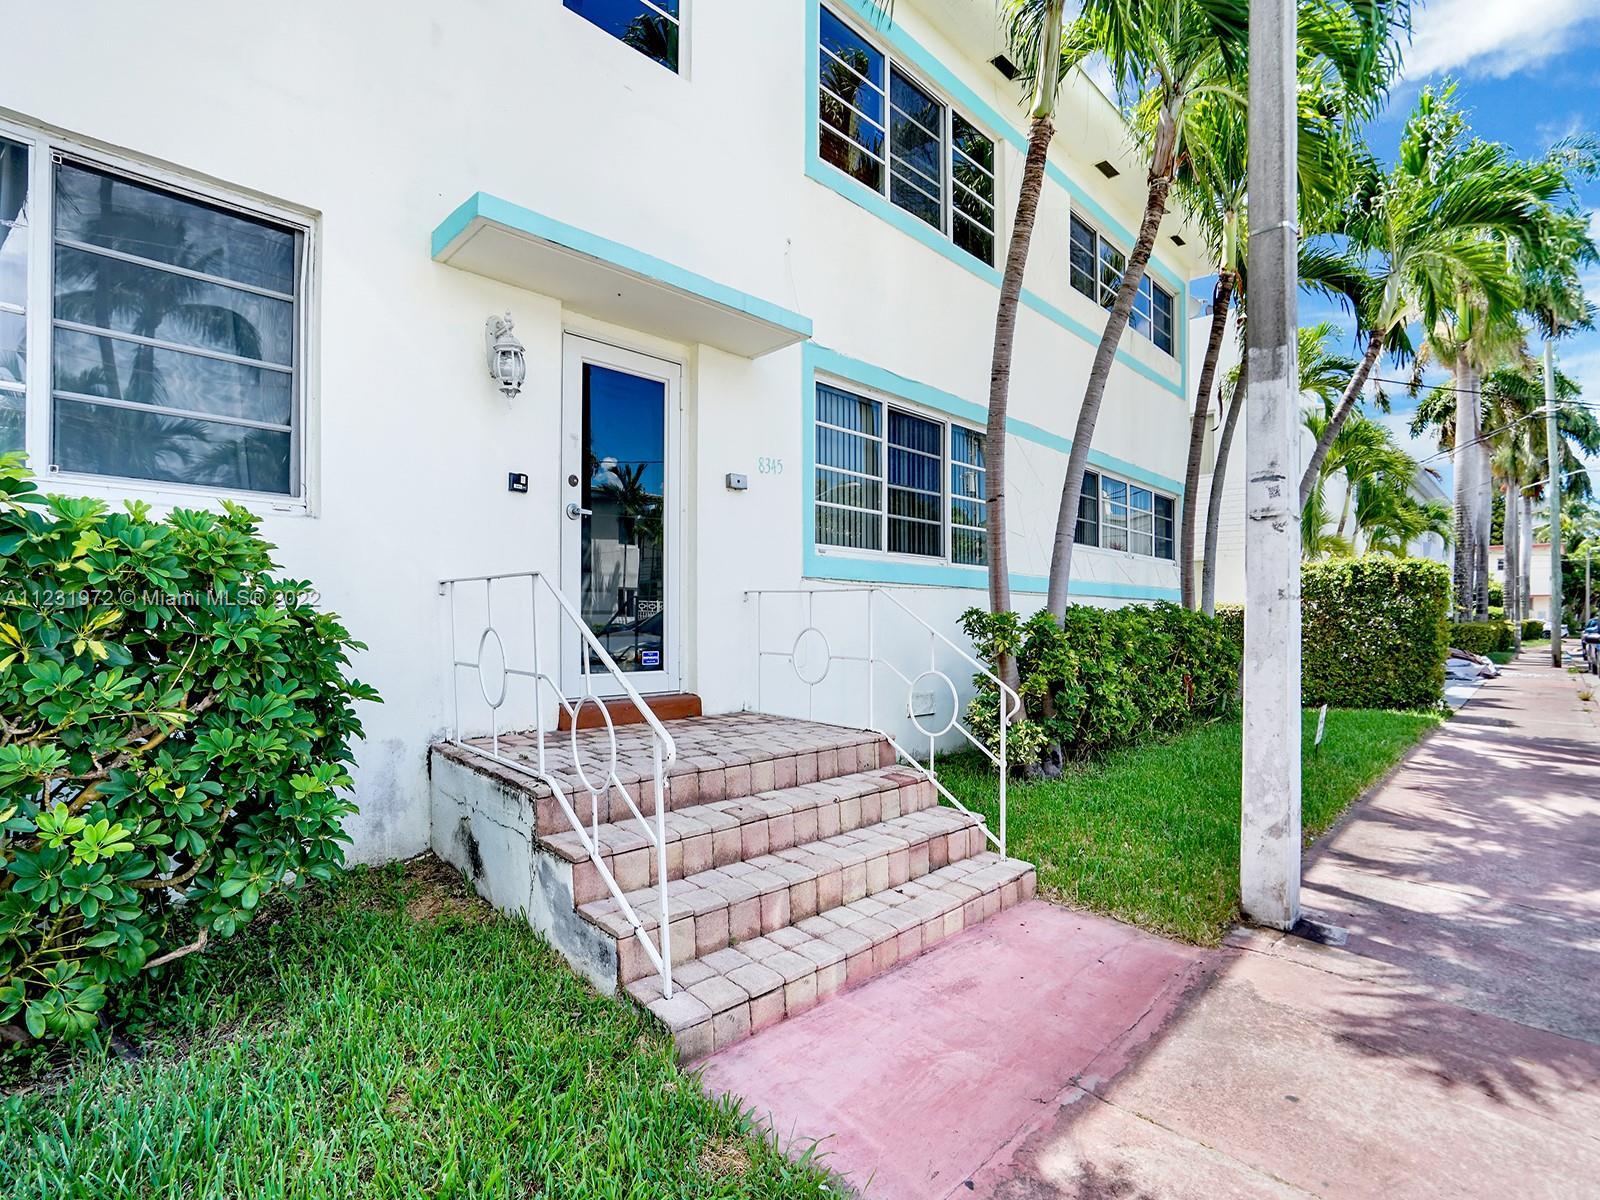 ncredible opportunity to own this cozy corner unit located in North Miami Beach. This amazing 2 bedr